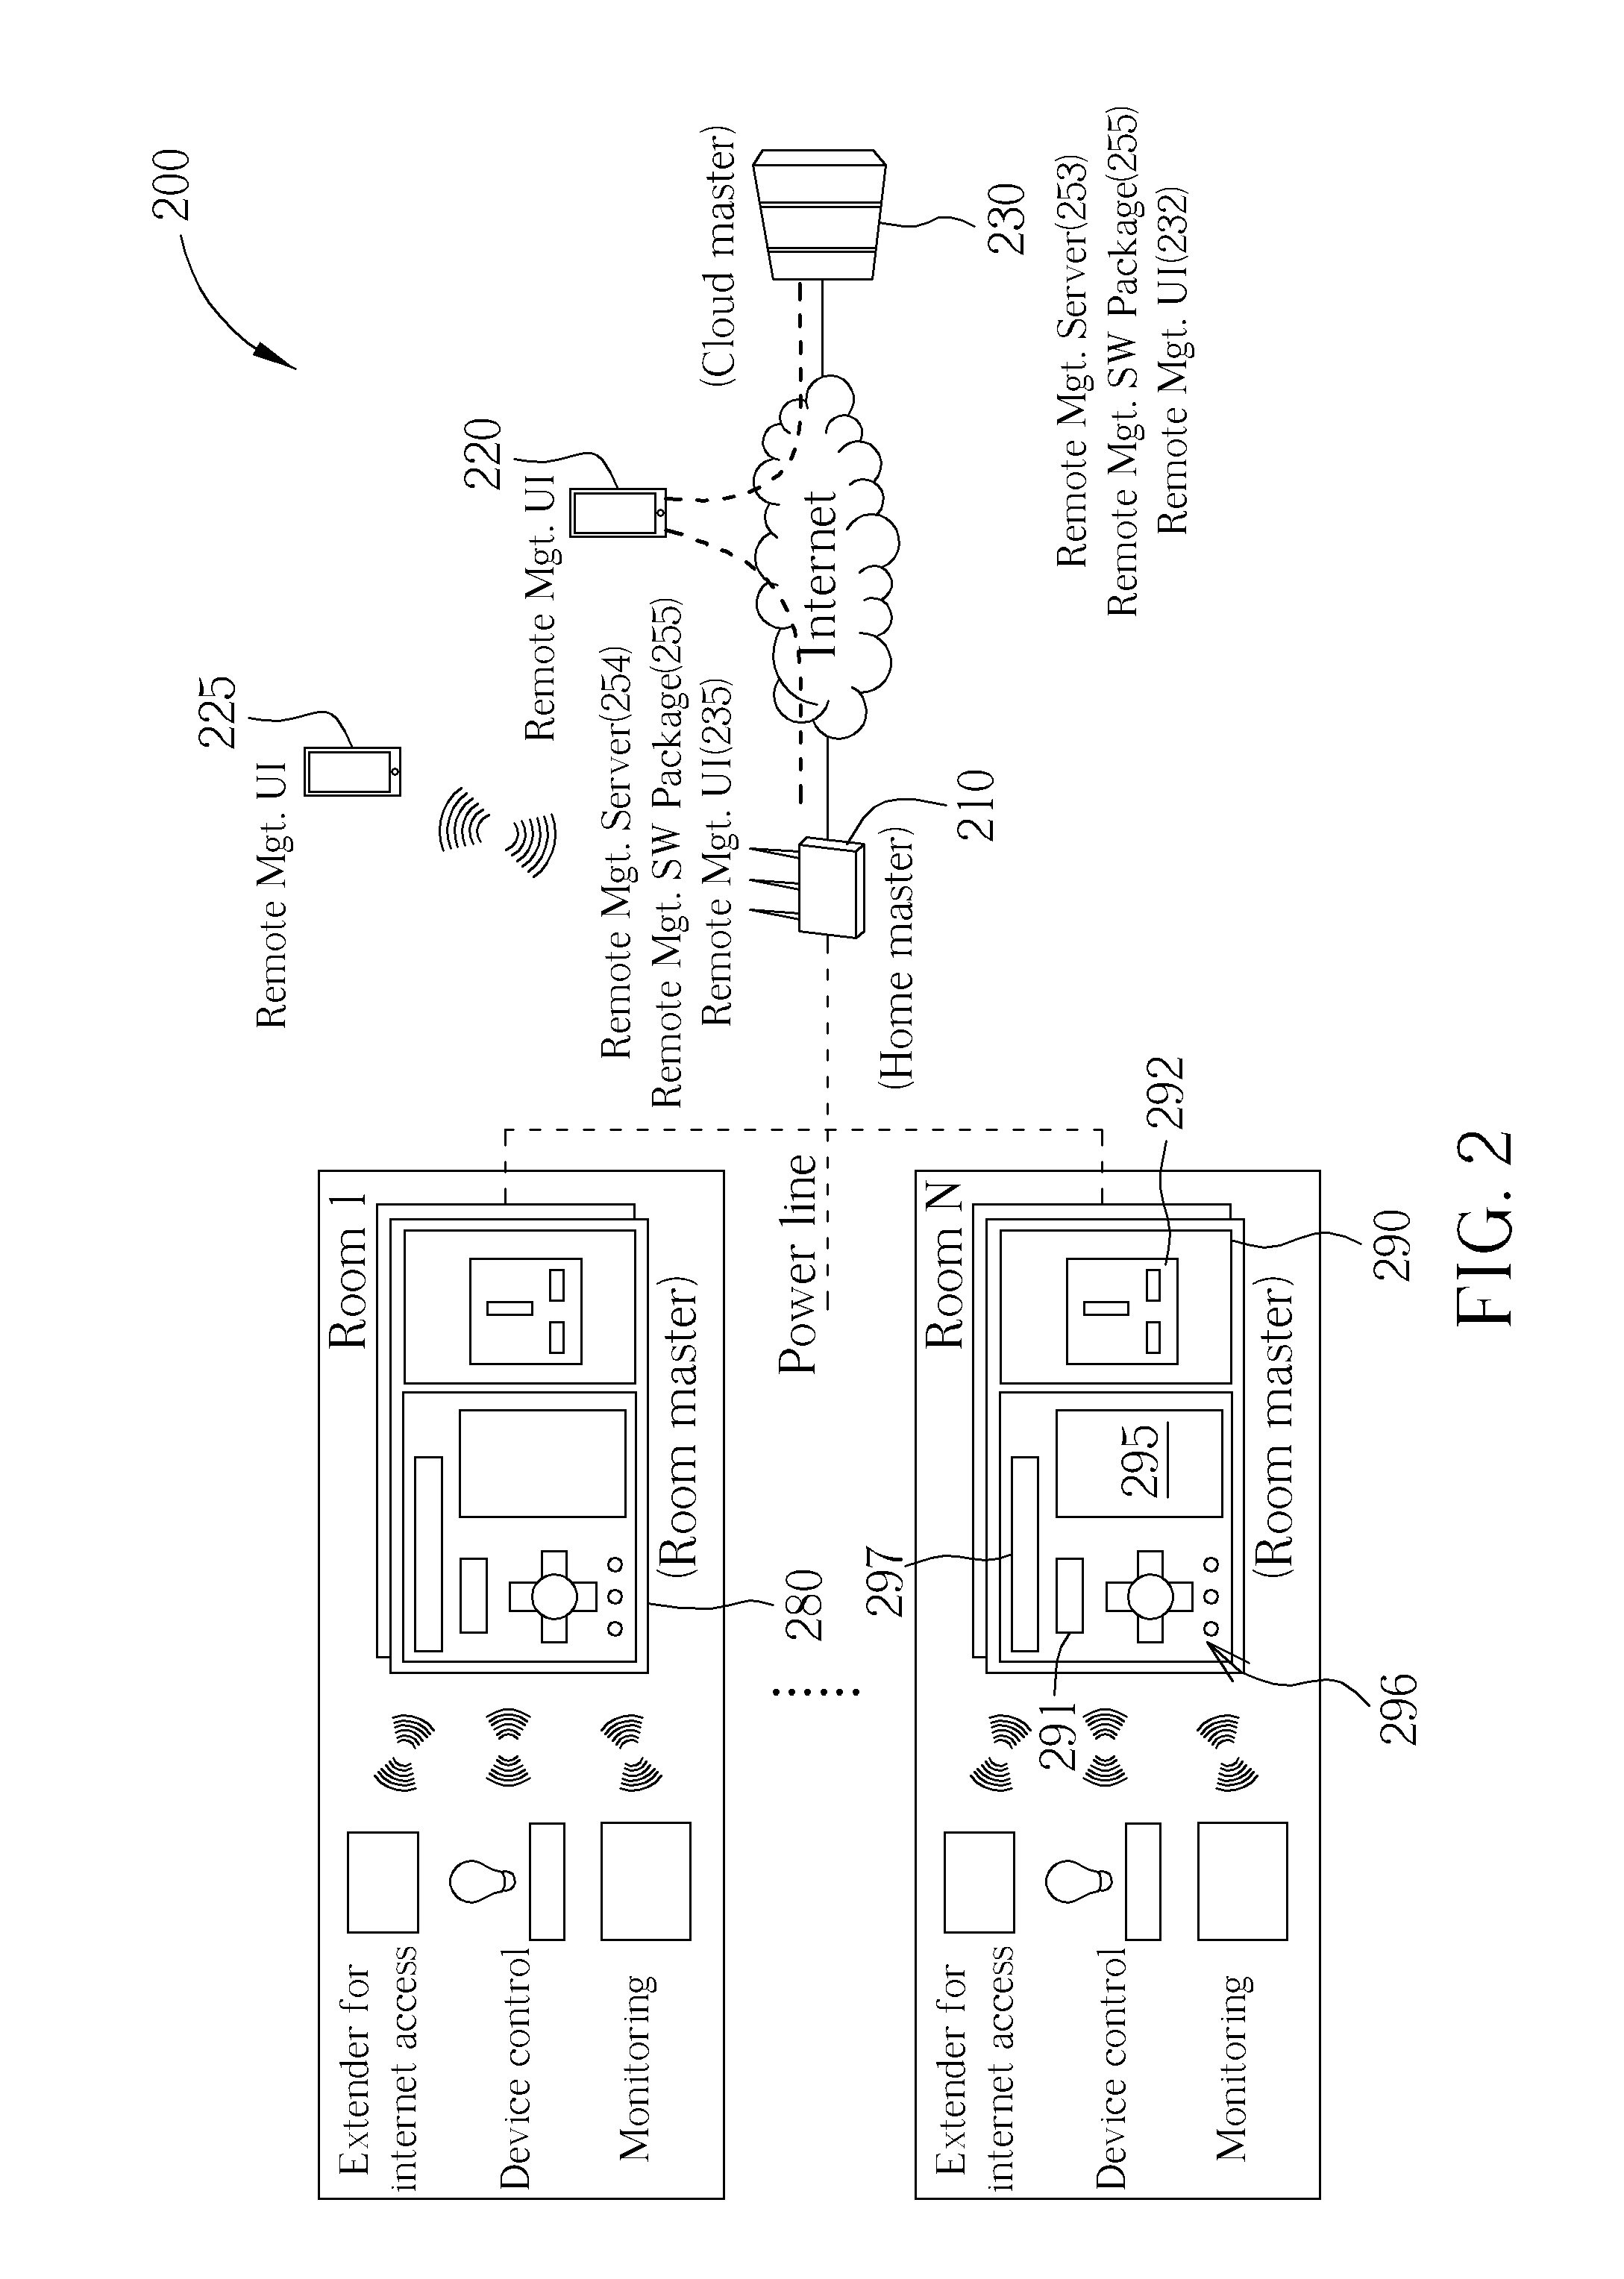 Wall-embedded Power Line Communication Device